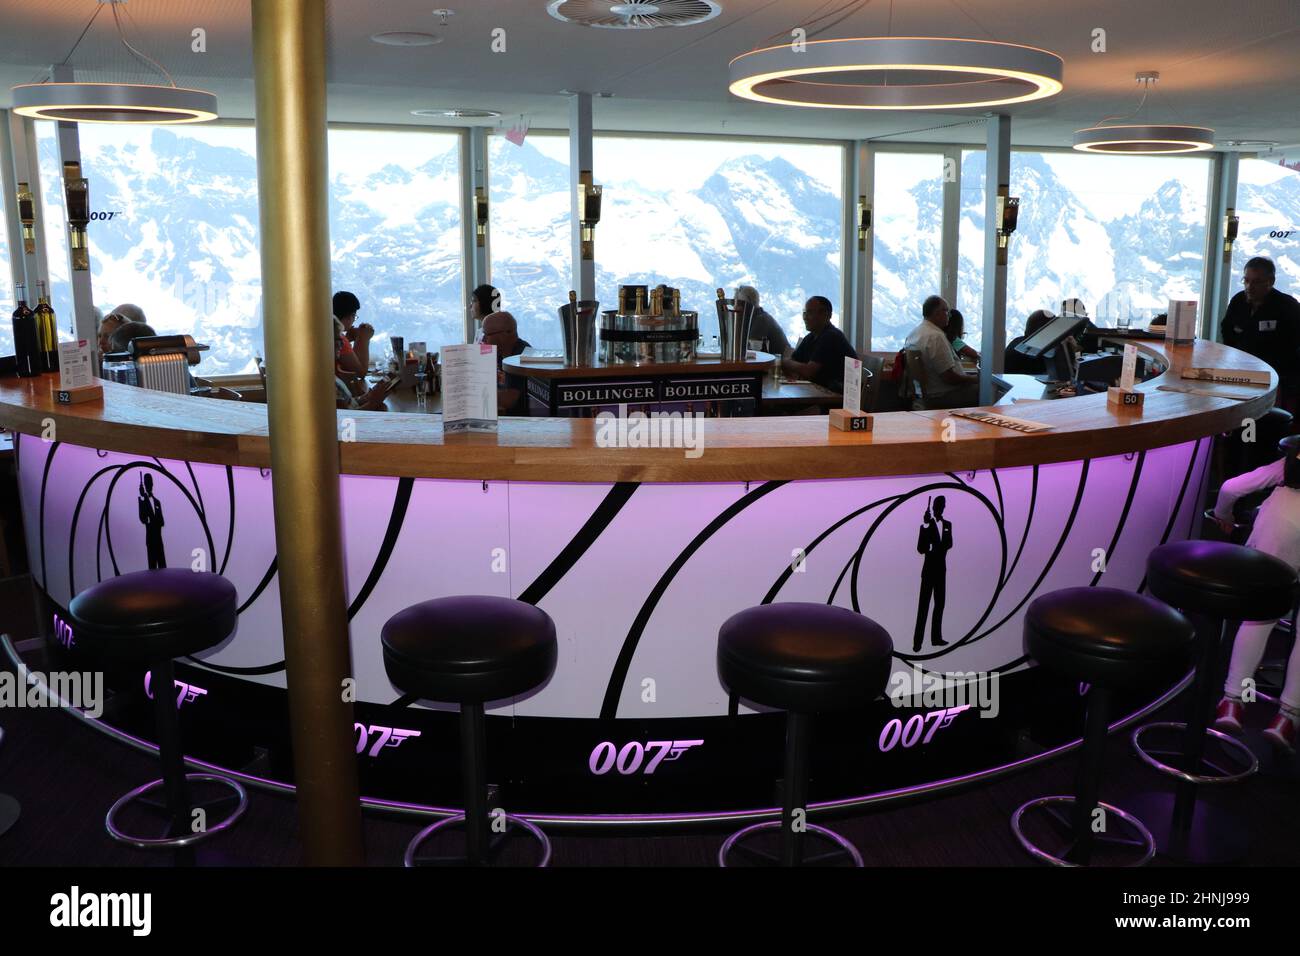 James Bond Champagne Bar at the Shilthorn revolving restaurant in the room featured in 'On Her Majestys Secret Service' film Stock Photo